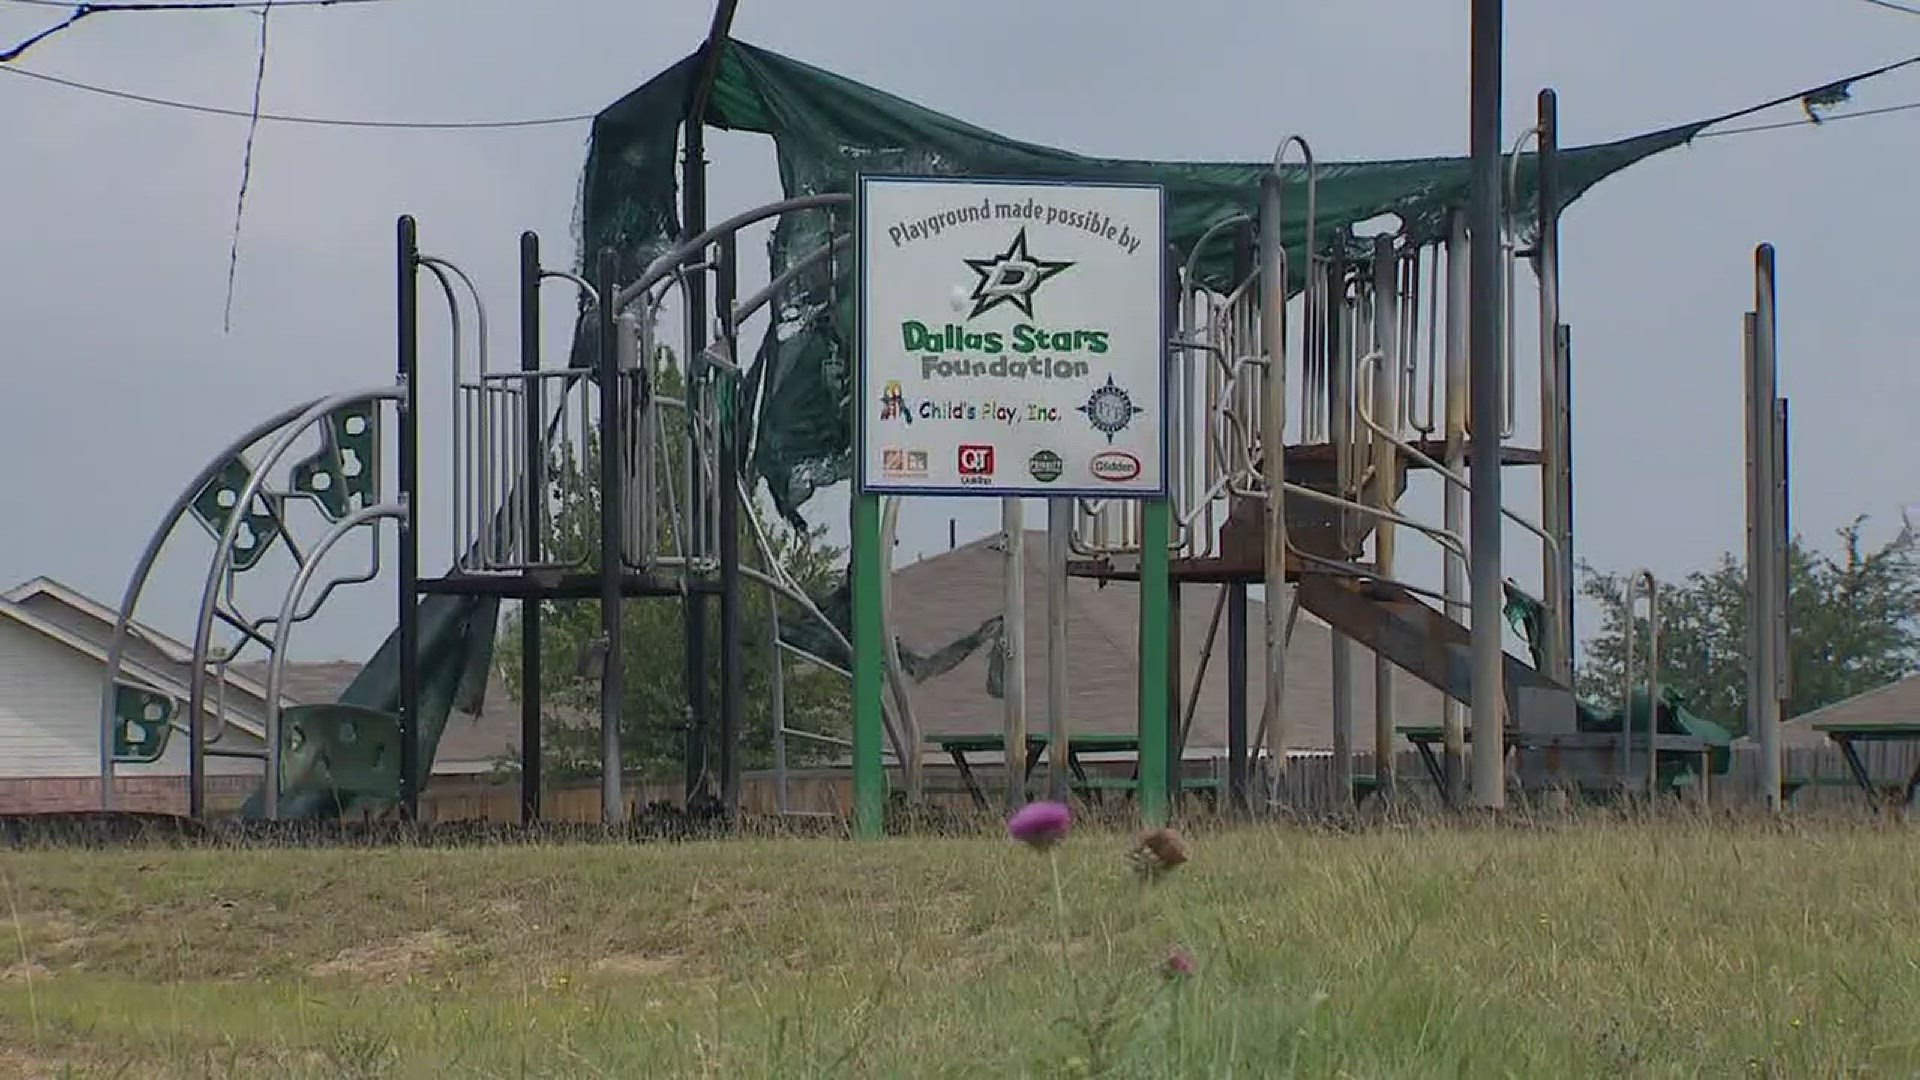 Teen arrested for allegedly setting fire to Youth World playground